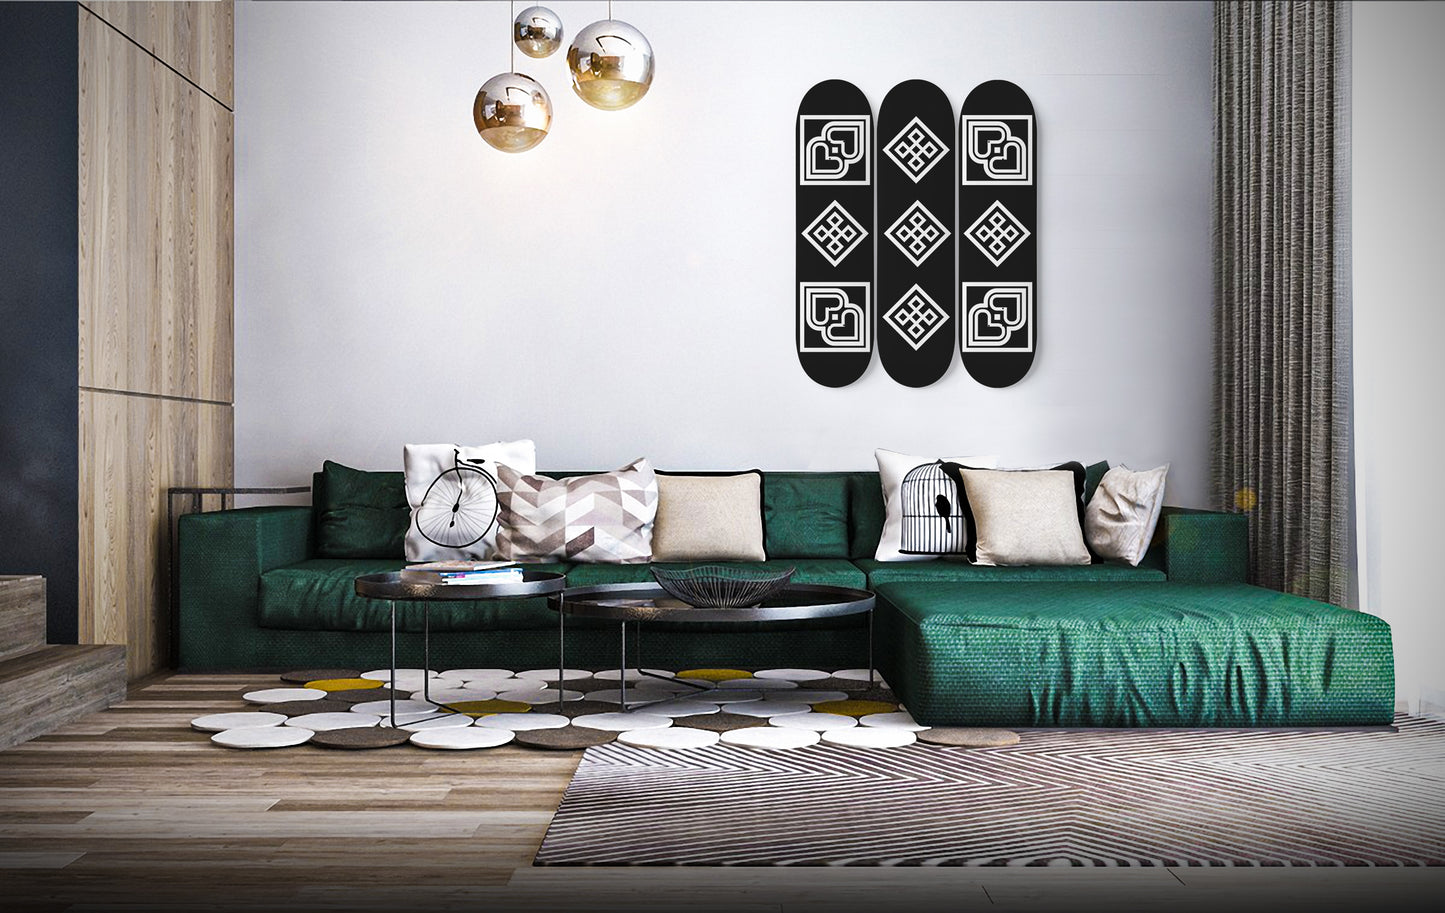 Hmong Ethnic - Embroidery Patterns Inspired Black & White Edition - 3 Piece Skateboard Wall Art